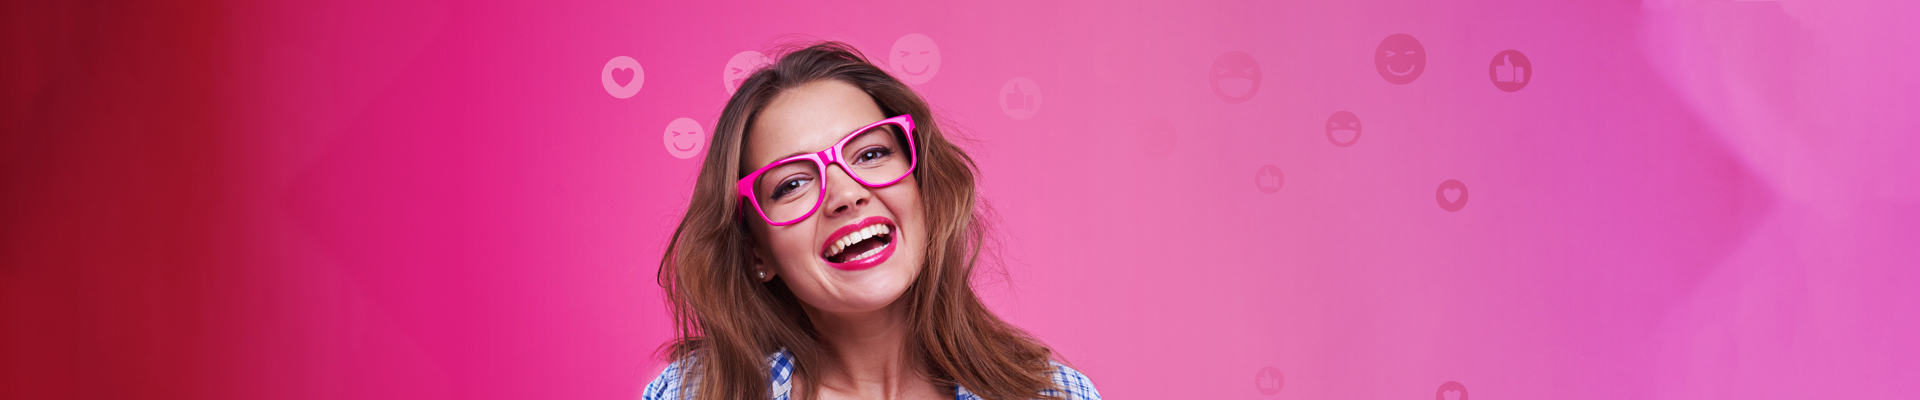 Woman in pink glasses smiling